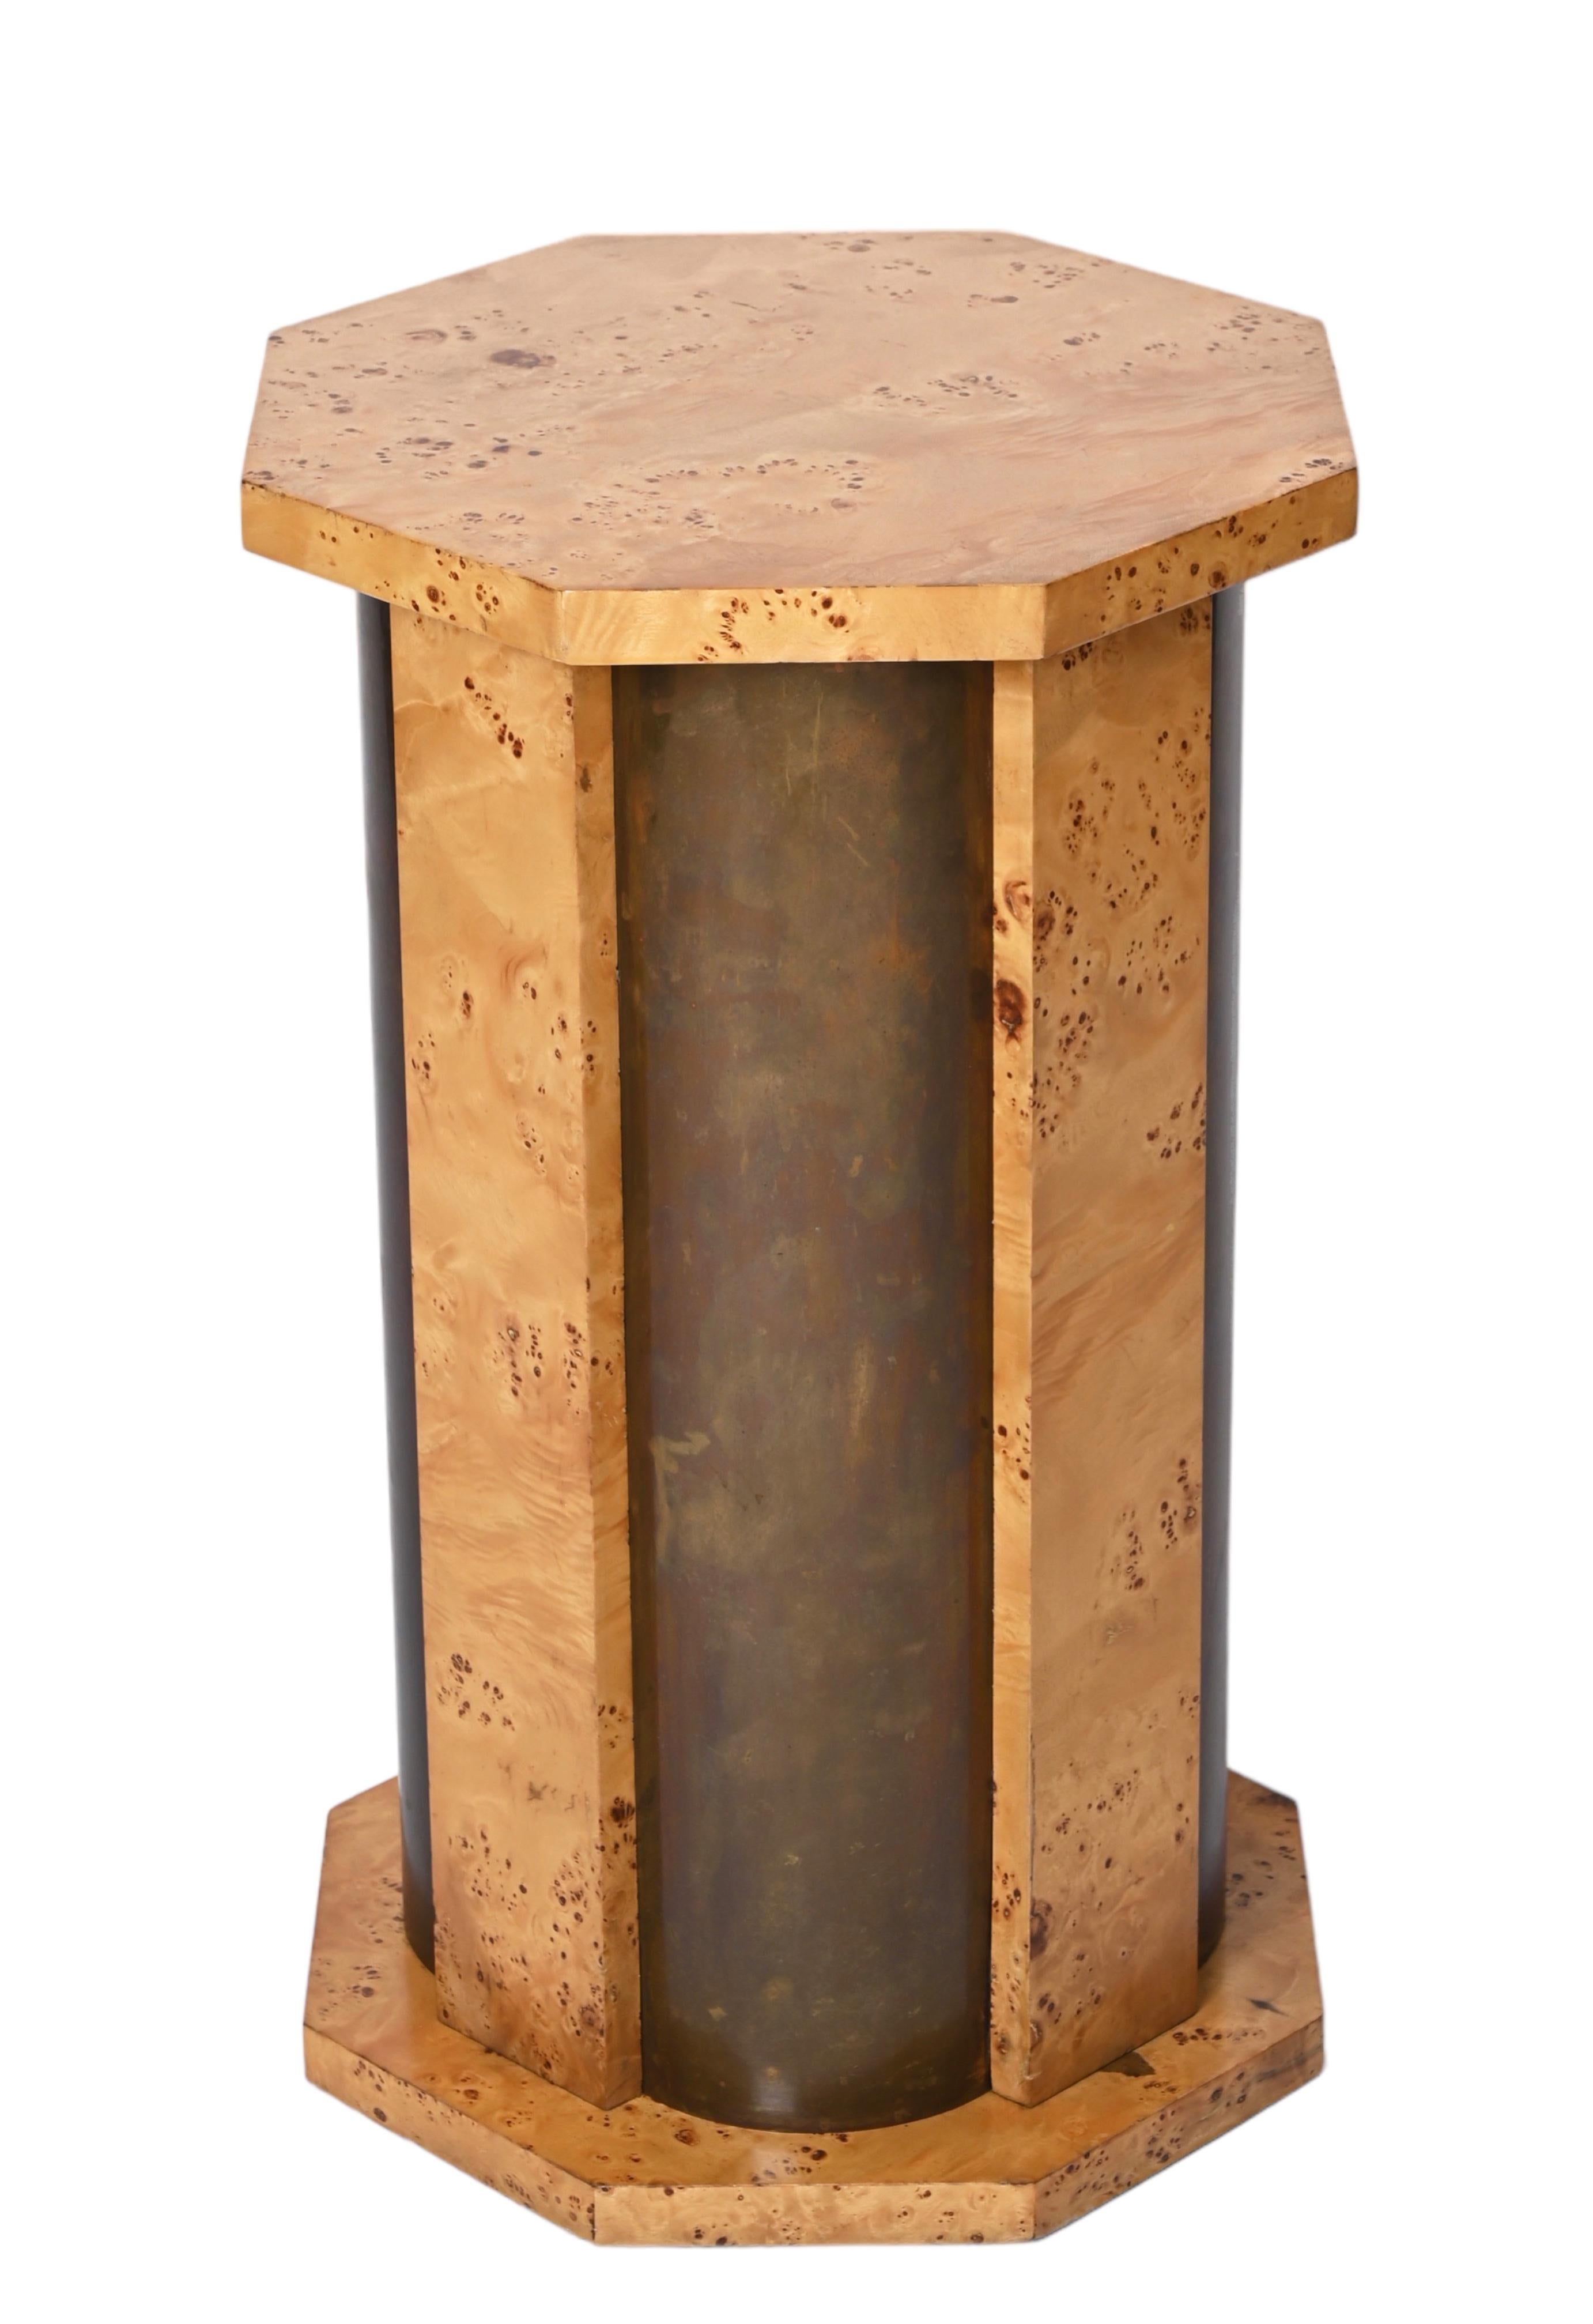 Tommaso Barbi Octagonal Table Pedestal in Burl Wood and Brass, Italy, 1970 For Sale 7